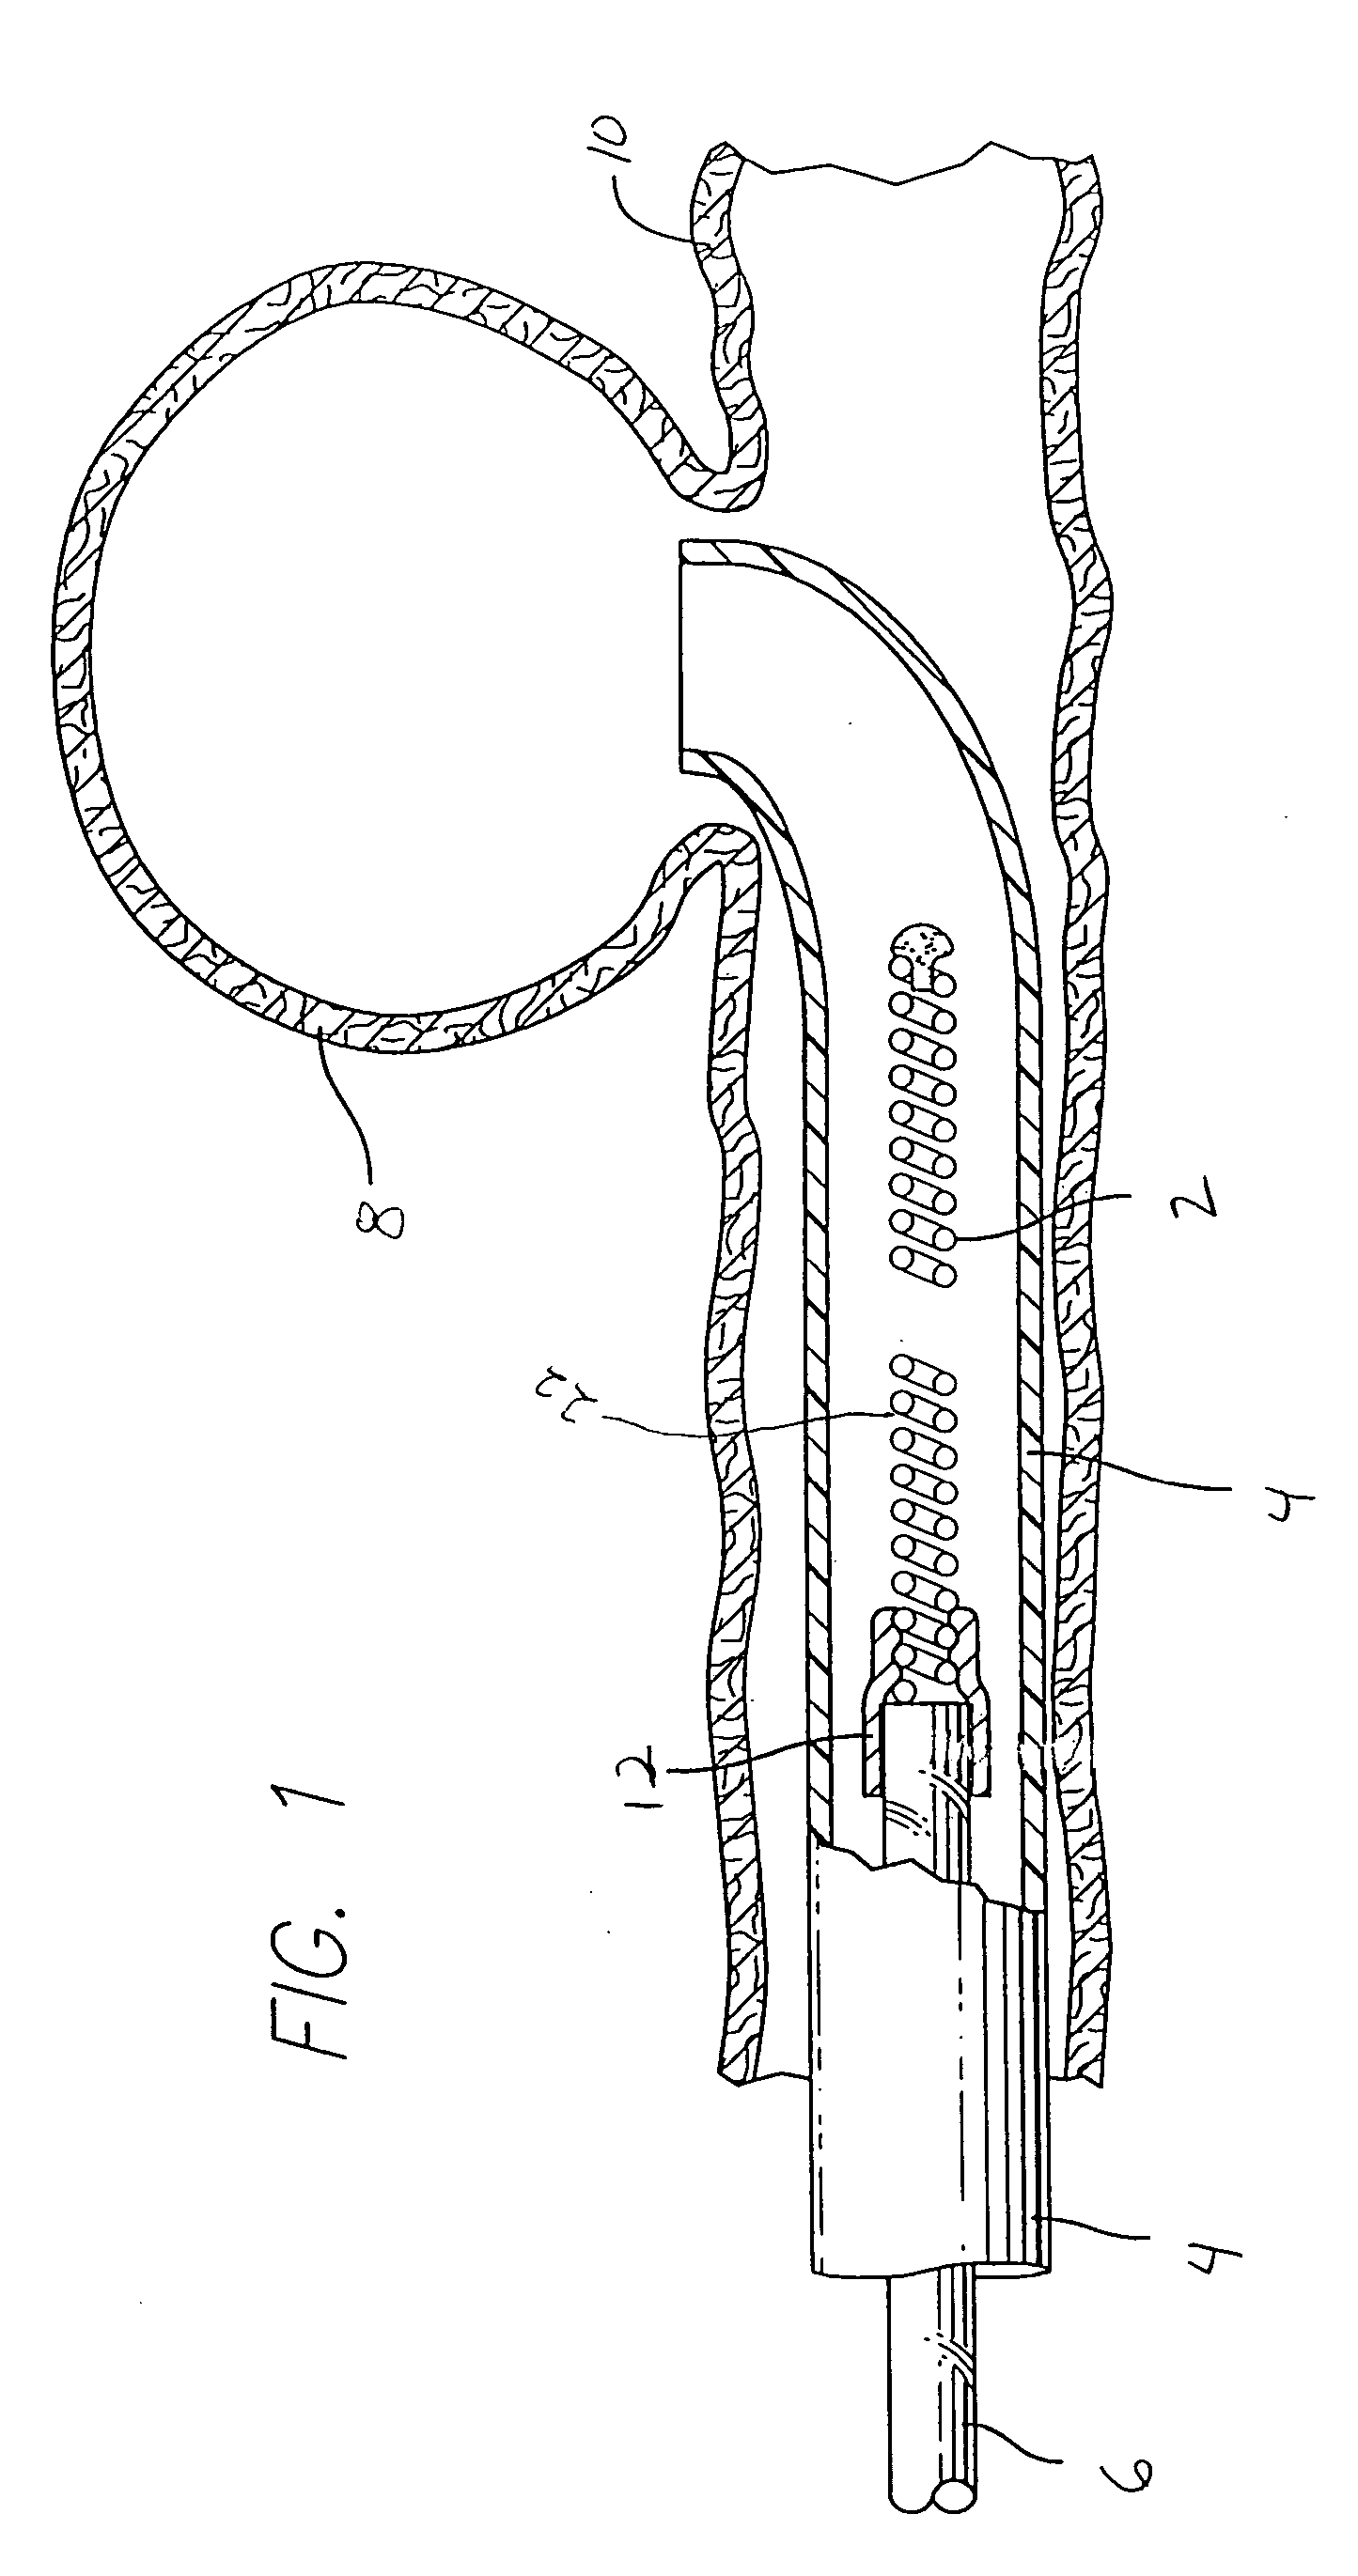 Anchored stent and occlusive device for treatment of aneurysms